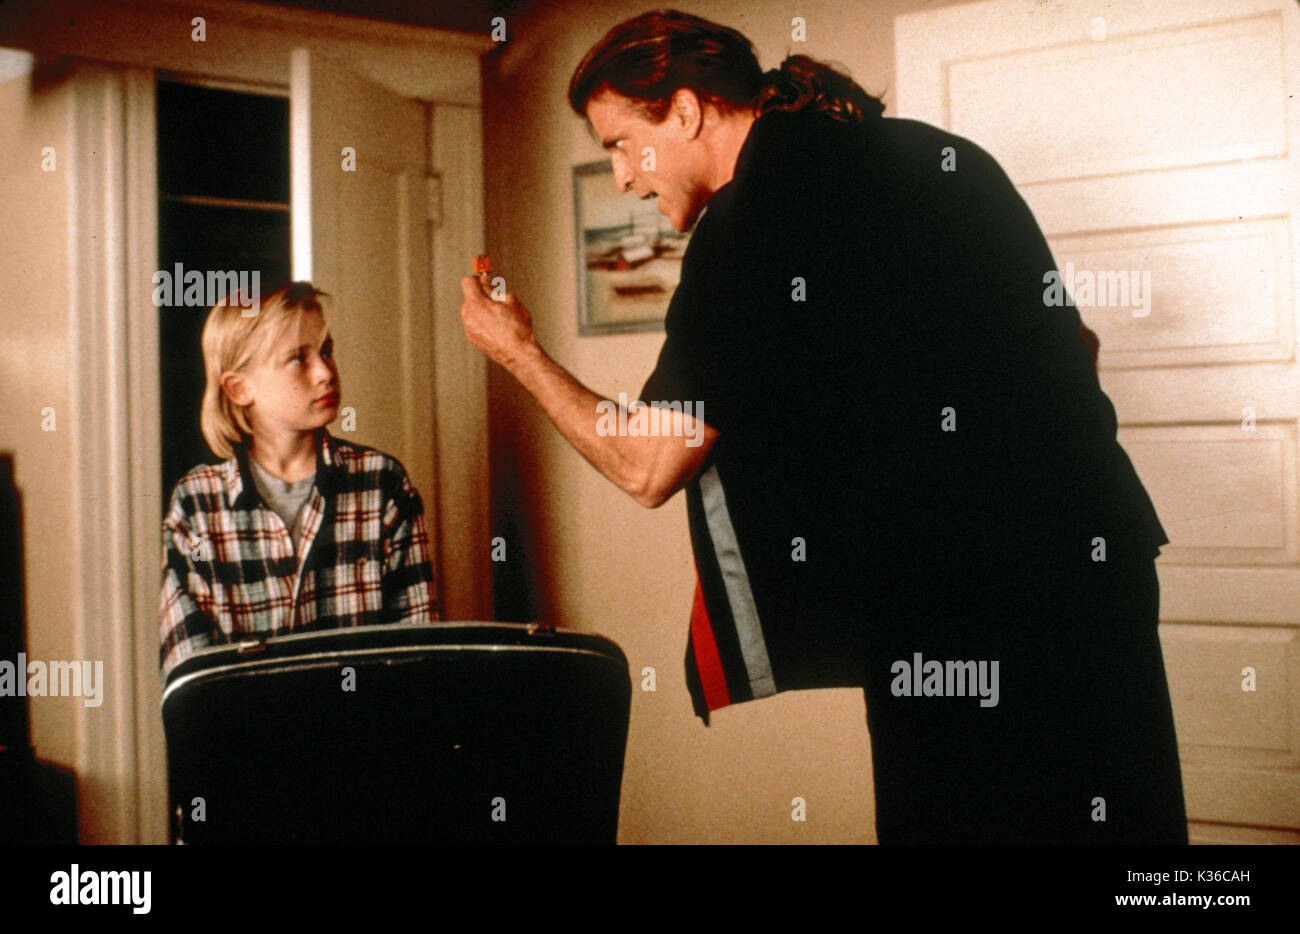 GETTING EVEN WITH DAD MACAULAY CULKIN AND TED DANSON   FILM RELEASE BY METRO-GOLDWYN-MAYER (MGM) GETTING EVEN WITH DAD MACAULAY CULKIN, TED DANSON     Date: 1994 Stock Photo